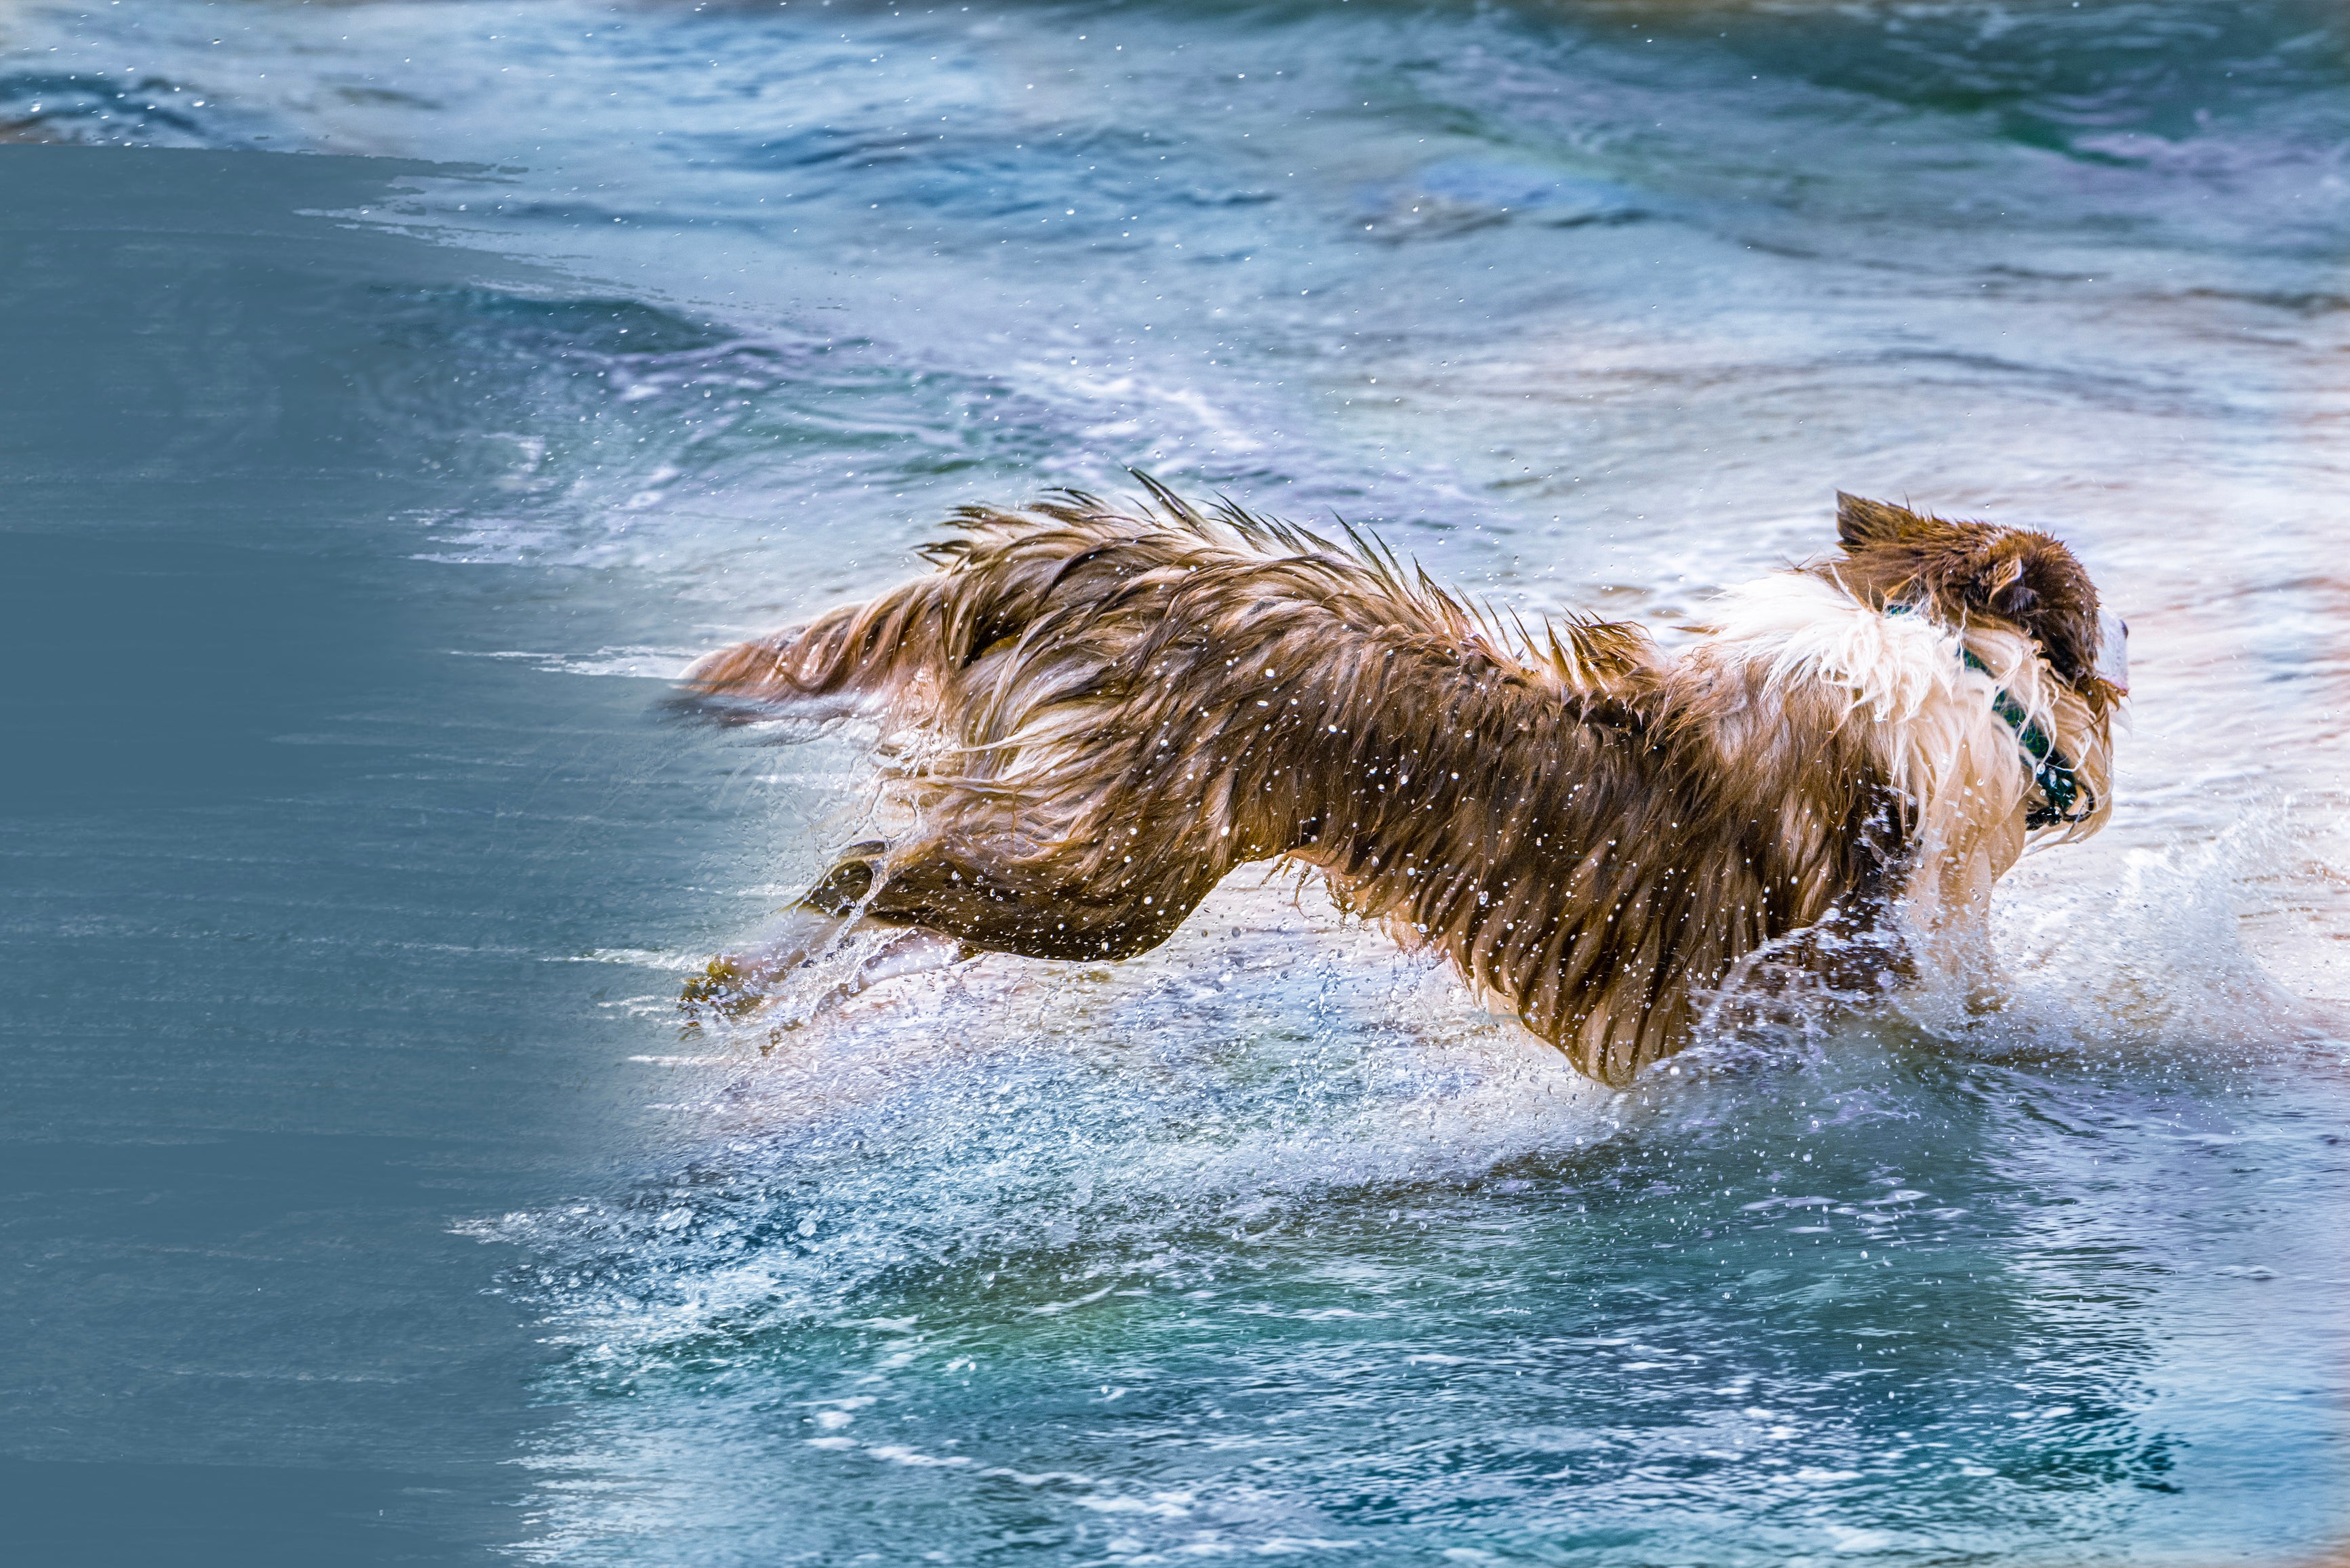 Pax the dog sprinting in water